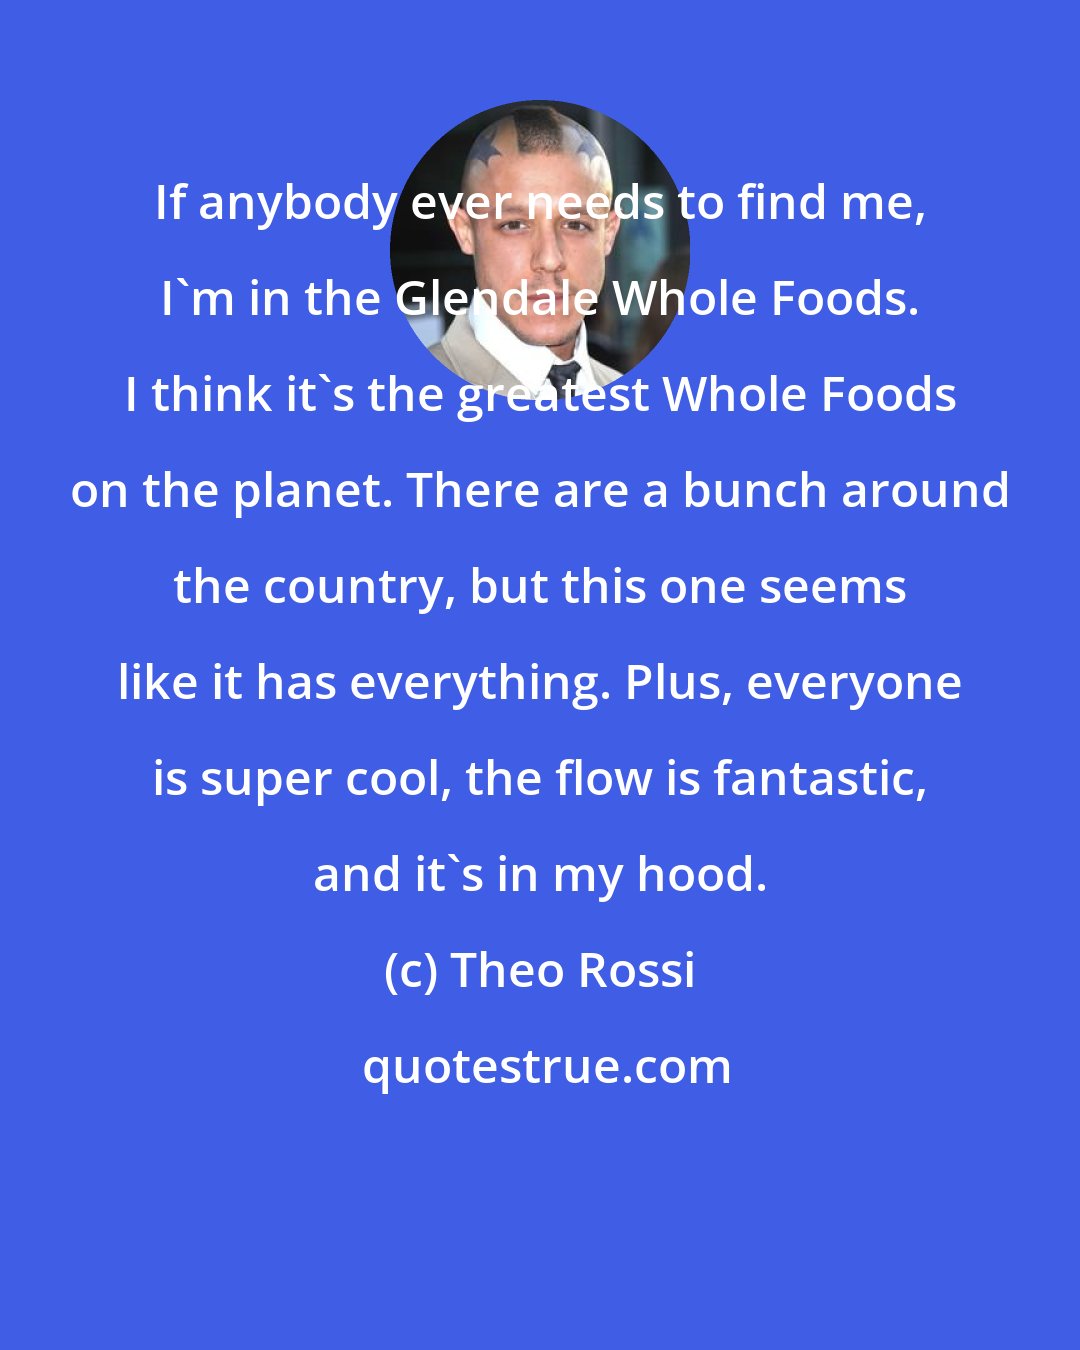 Theo Rossi: If anybody ever needs to find me, I'm in the Glendale Whole Foods. I think it's the greatest Whole Foods on the planet. There are a bunch around the country, but this one seems like it has everything. Plus, everyone is super cool, the flow is fantastic, and it's in my hood.